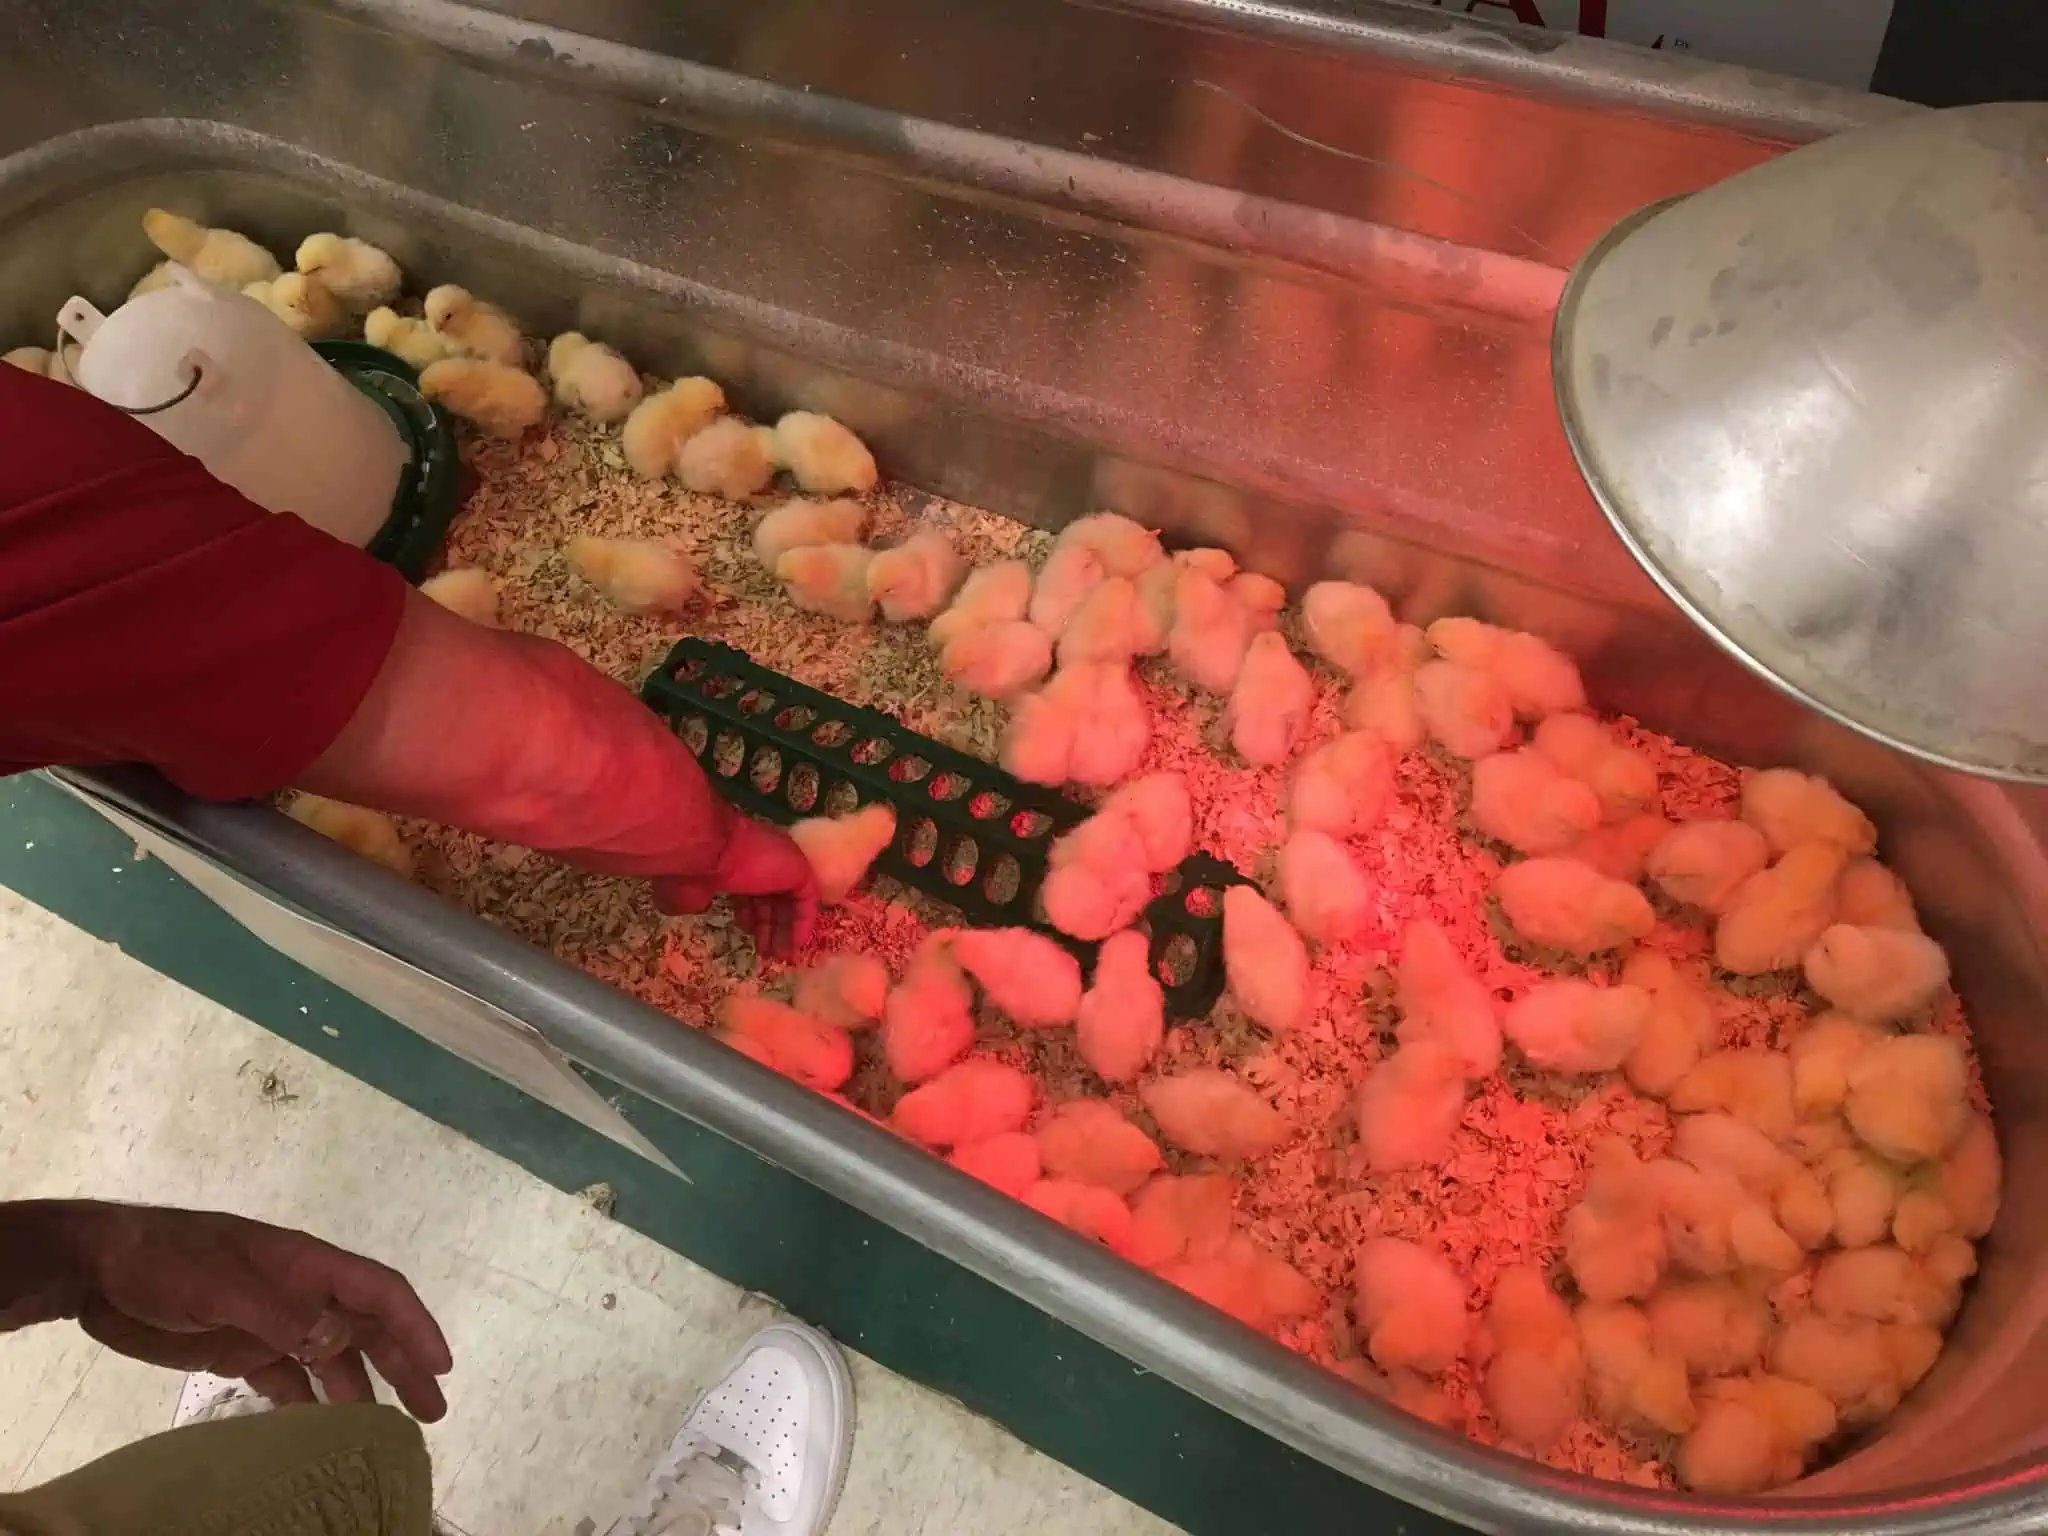 A bunch of baby chicks in a warming container.